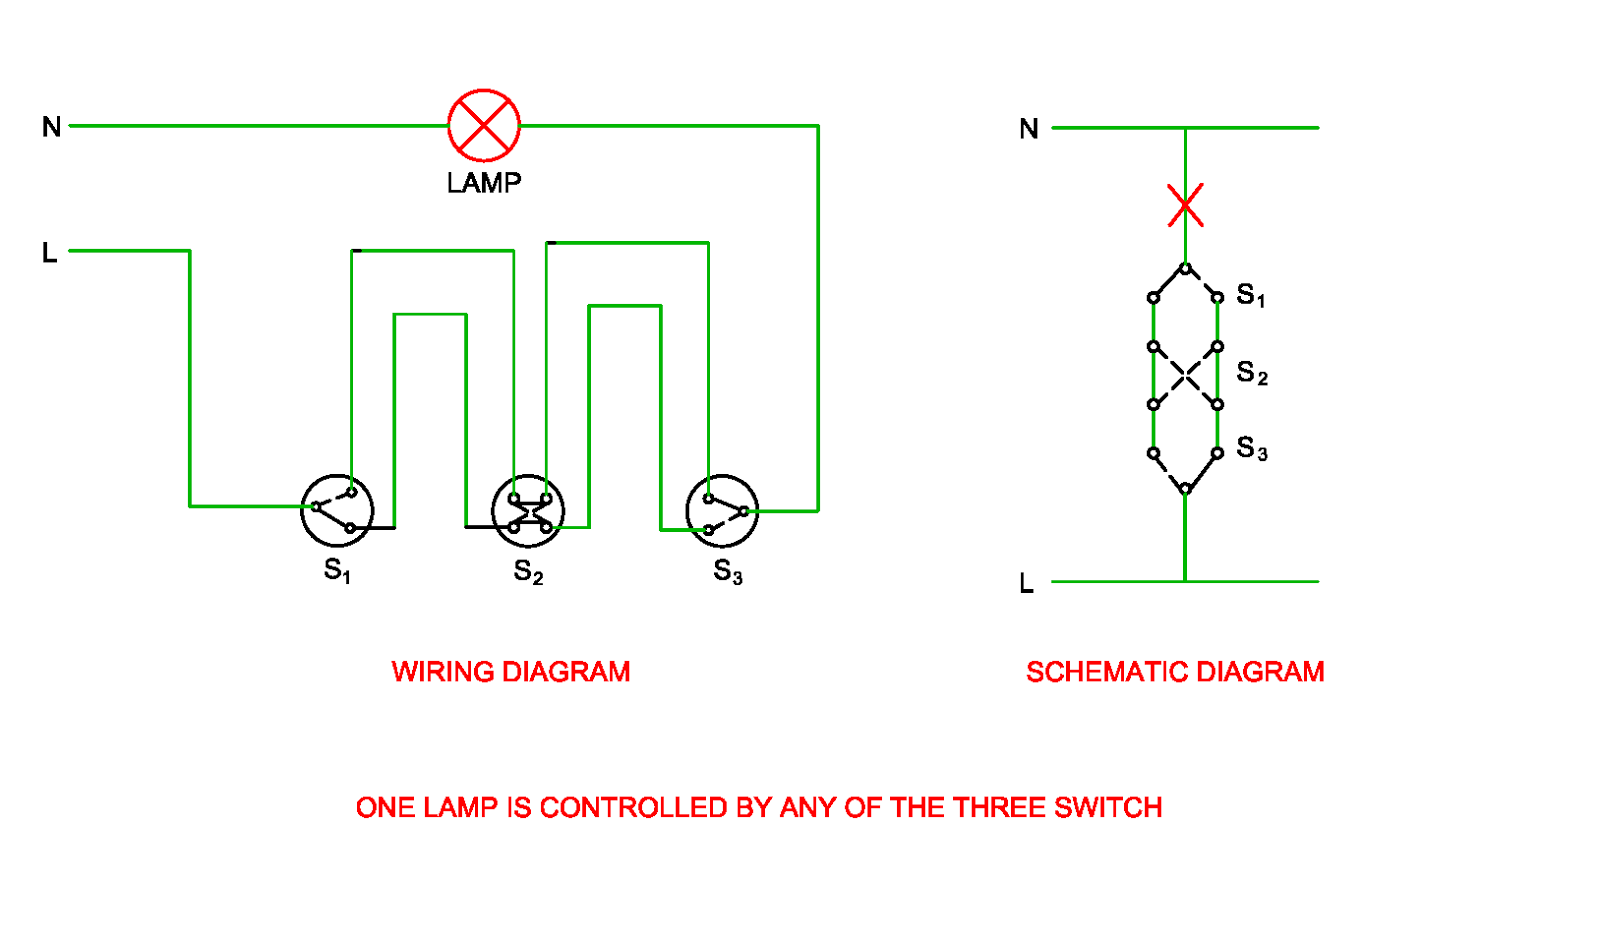 Schematic and Wiring Diagram of One Lamp is Controlled By Any of Three